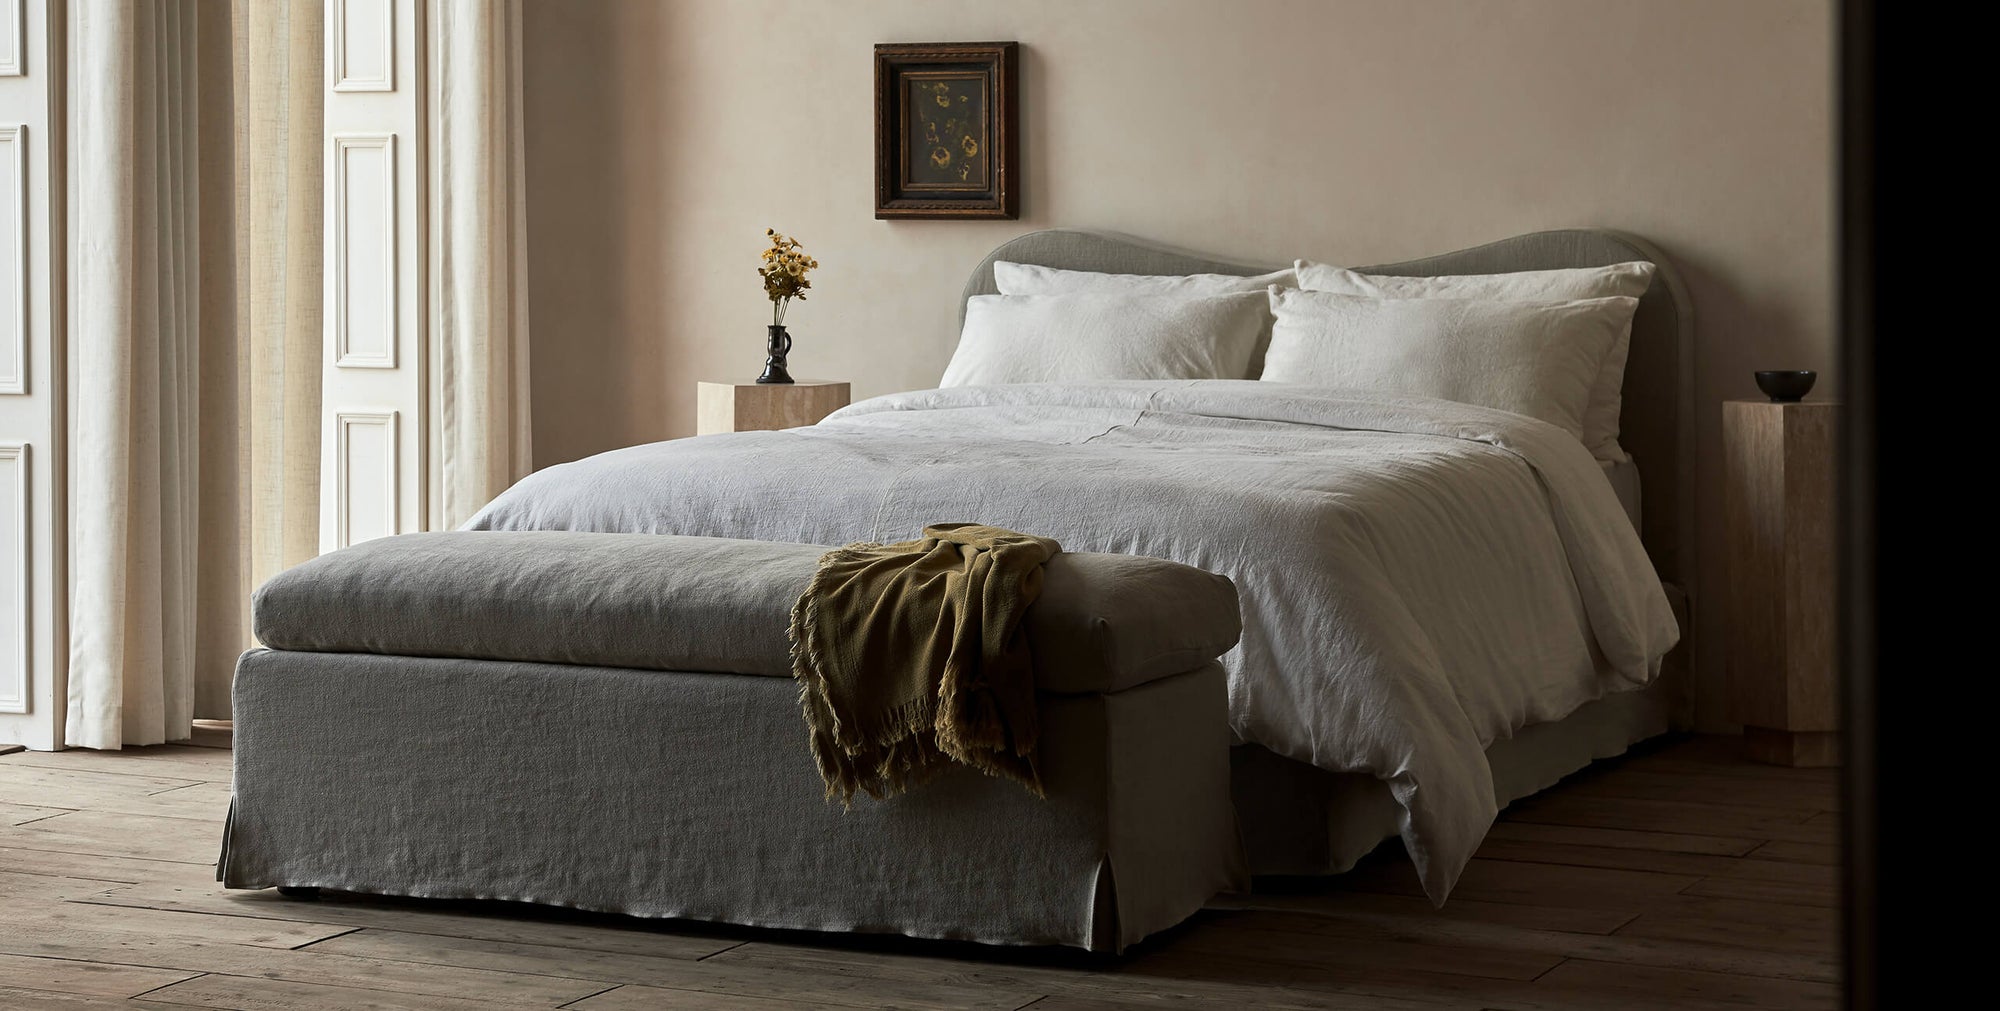 Esmé Storage Bench in Jasmine Rice, a light warm greige Medium Weight Linen, placed in a room at the foot of an Esmé Bed